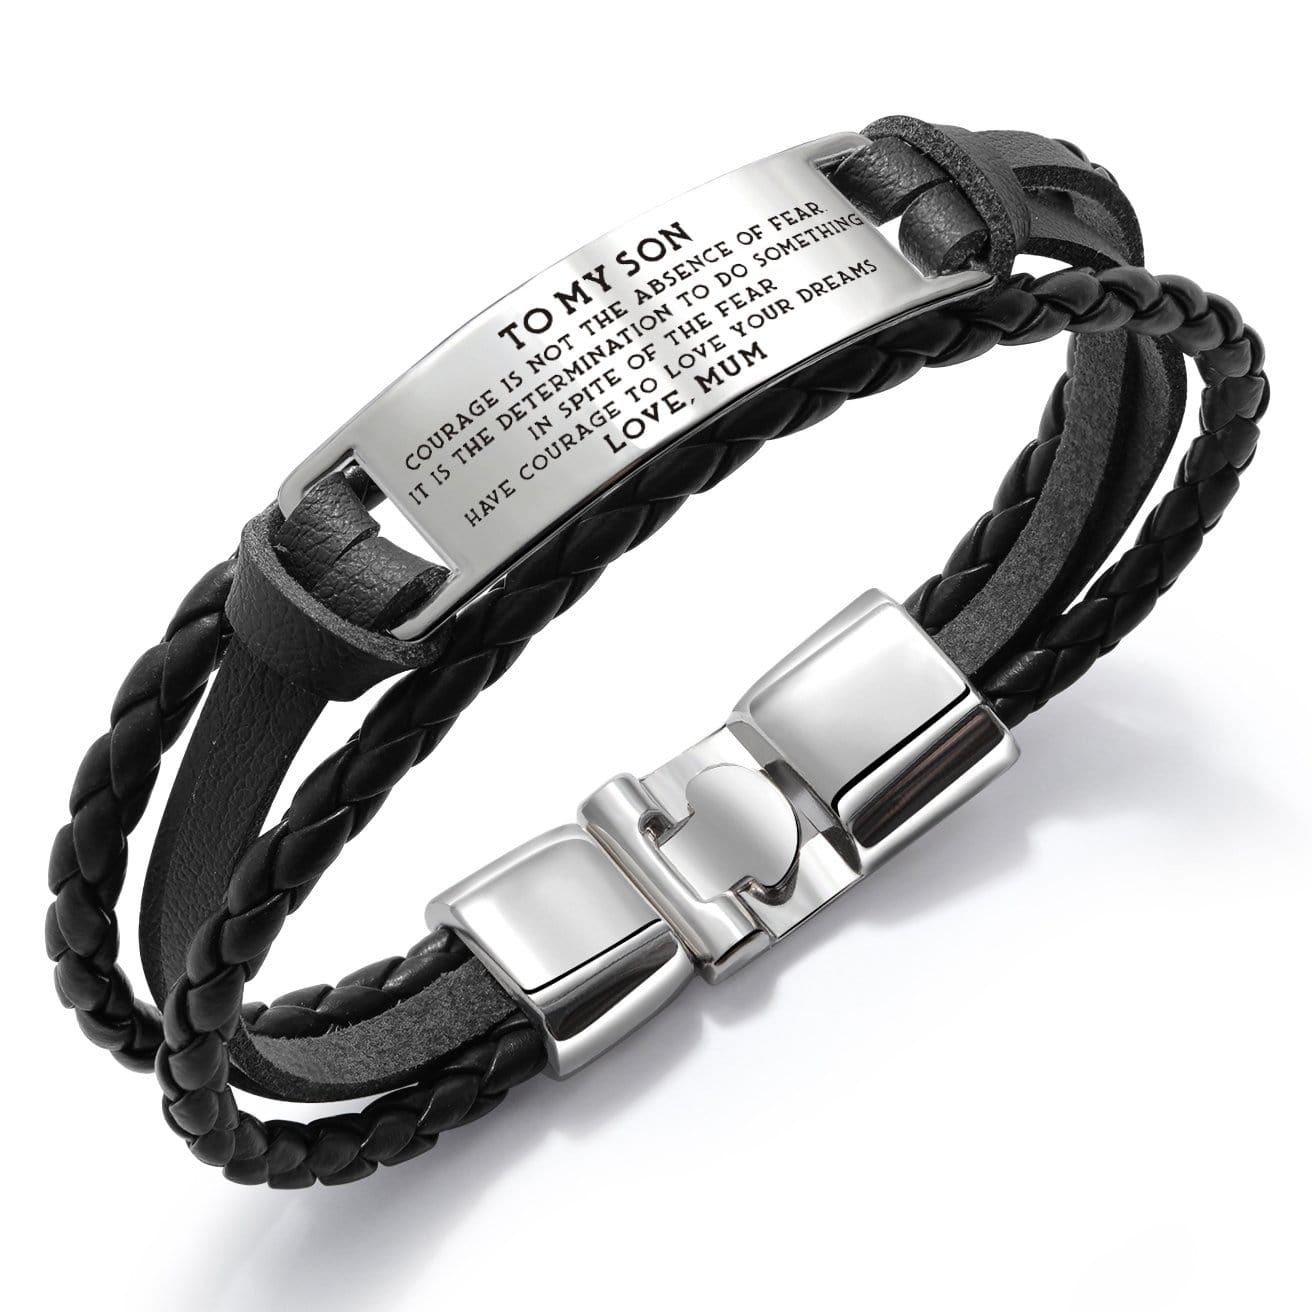 Bracelets Mum To Son - Have Courage To Love Your Dreams Leather Bracelet Black GiveMe-Gifts